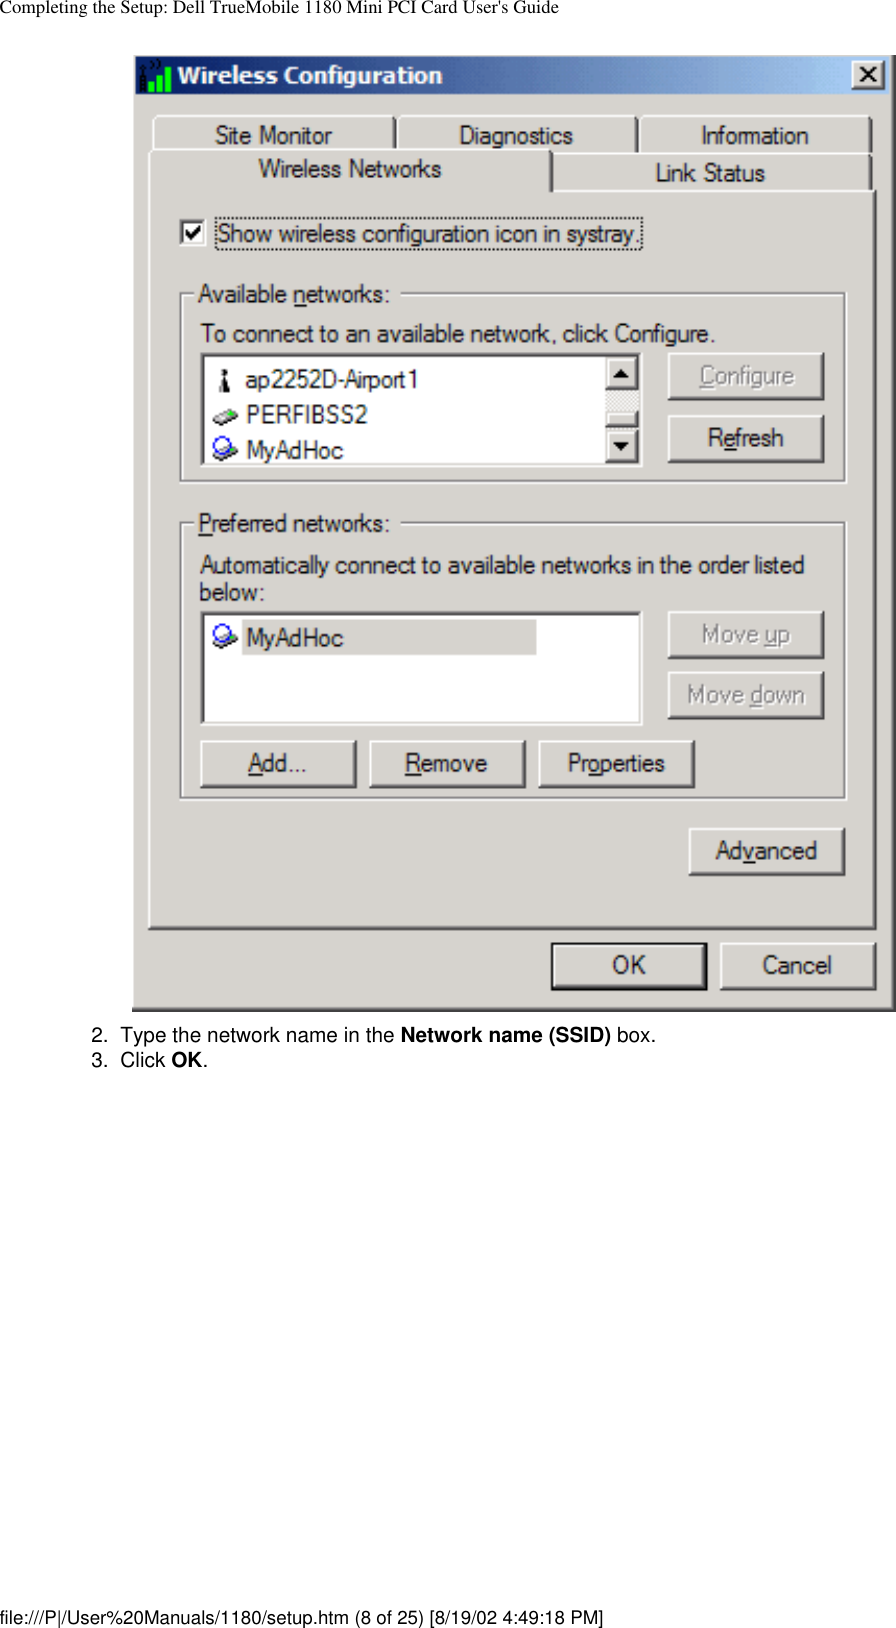 Completing the Setup: Dell TrueMobile 1180 Mini PCI Card User&apos;s Guide2.  Type the network name in the Network name (SSID) box.3.  Click OK. file:///P|/User%20Manuals/1180/setup.htm (8 of 25) [8/19/02 4:49:18 PM]